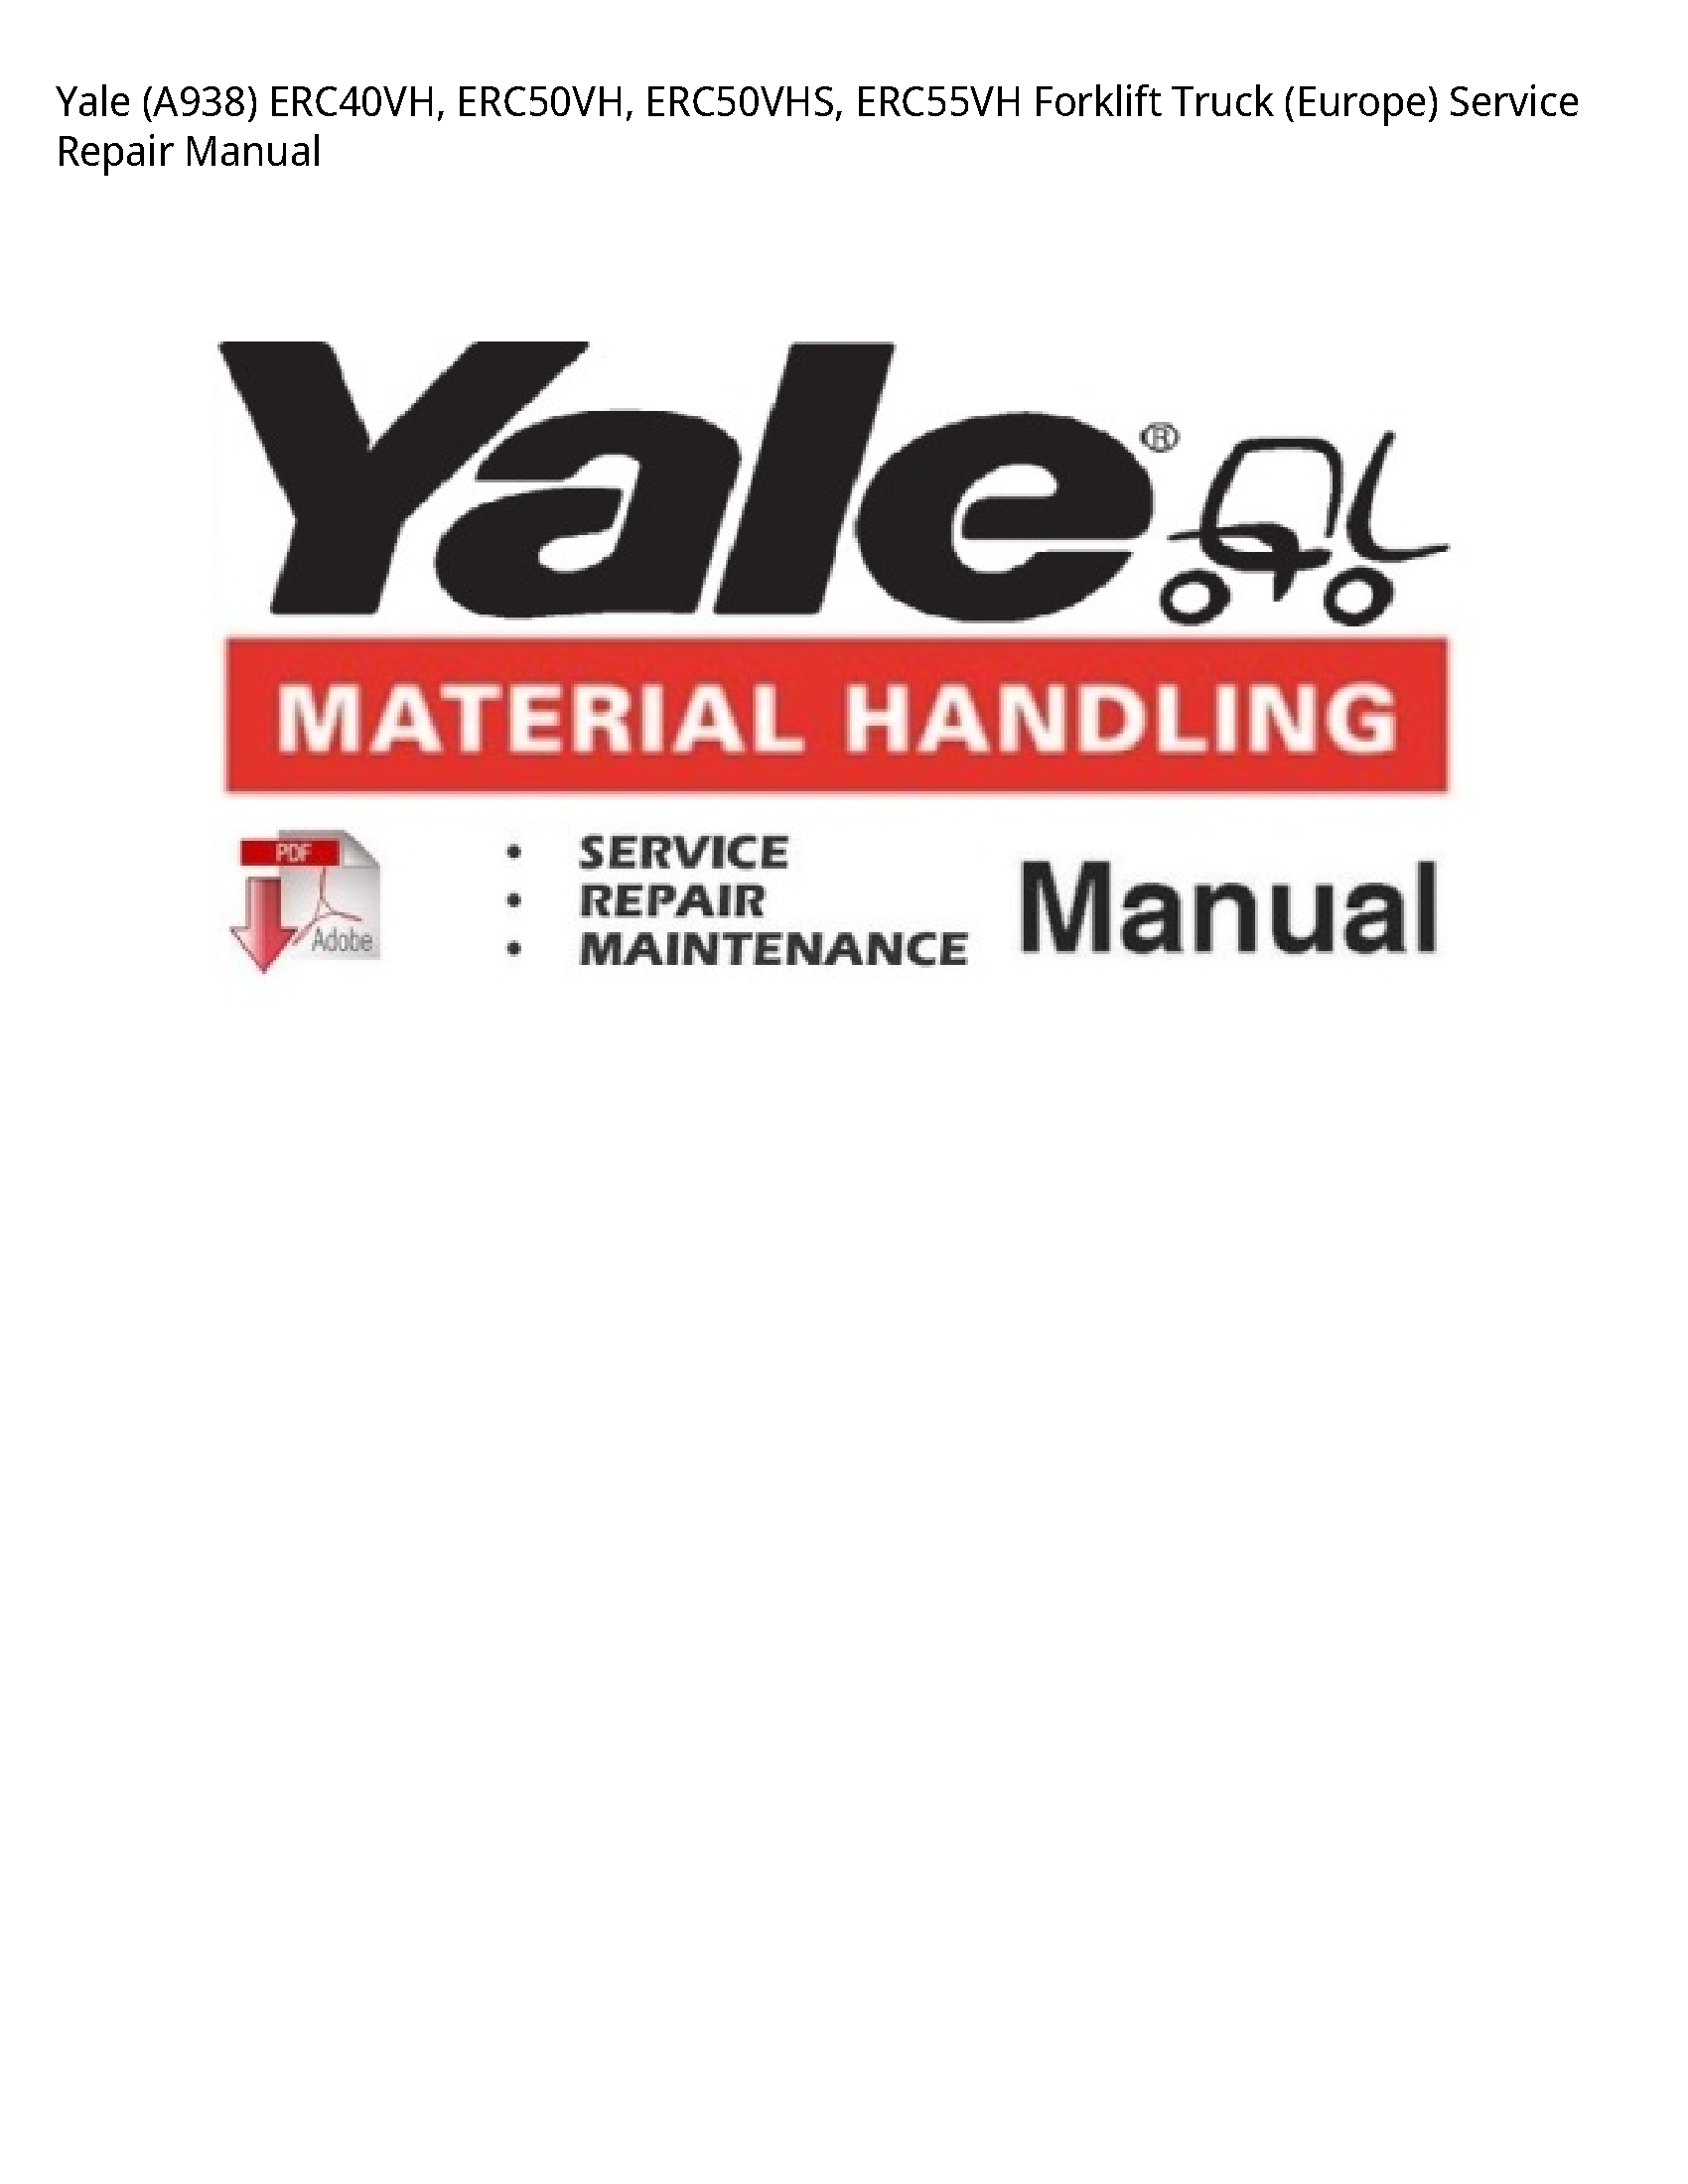 Yale (A938) Forklift Truck (Europe) manual